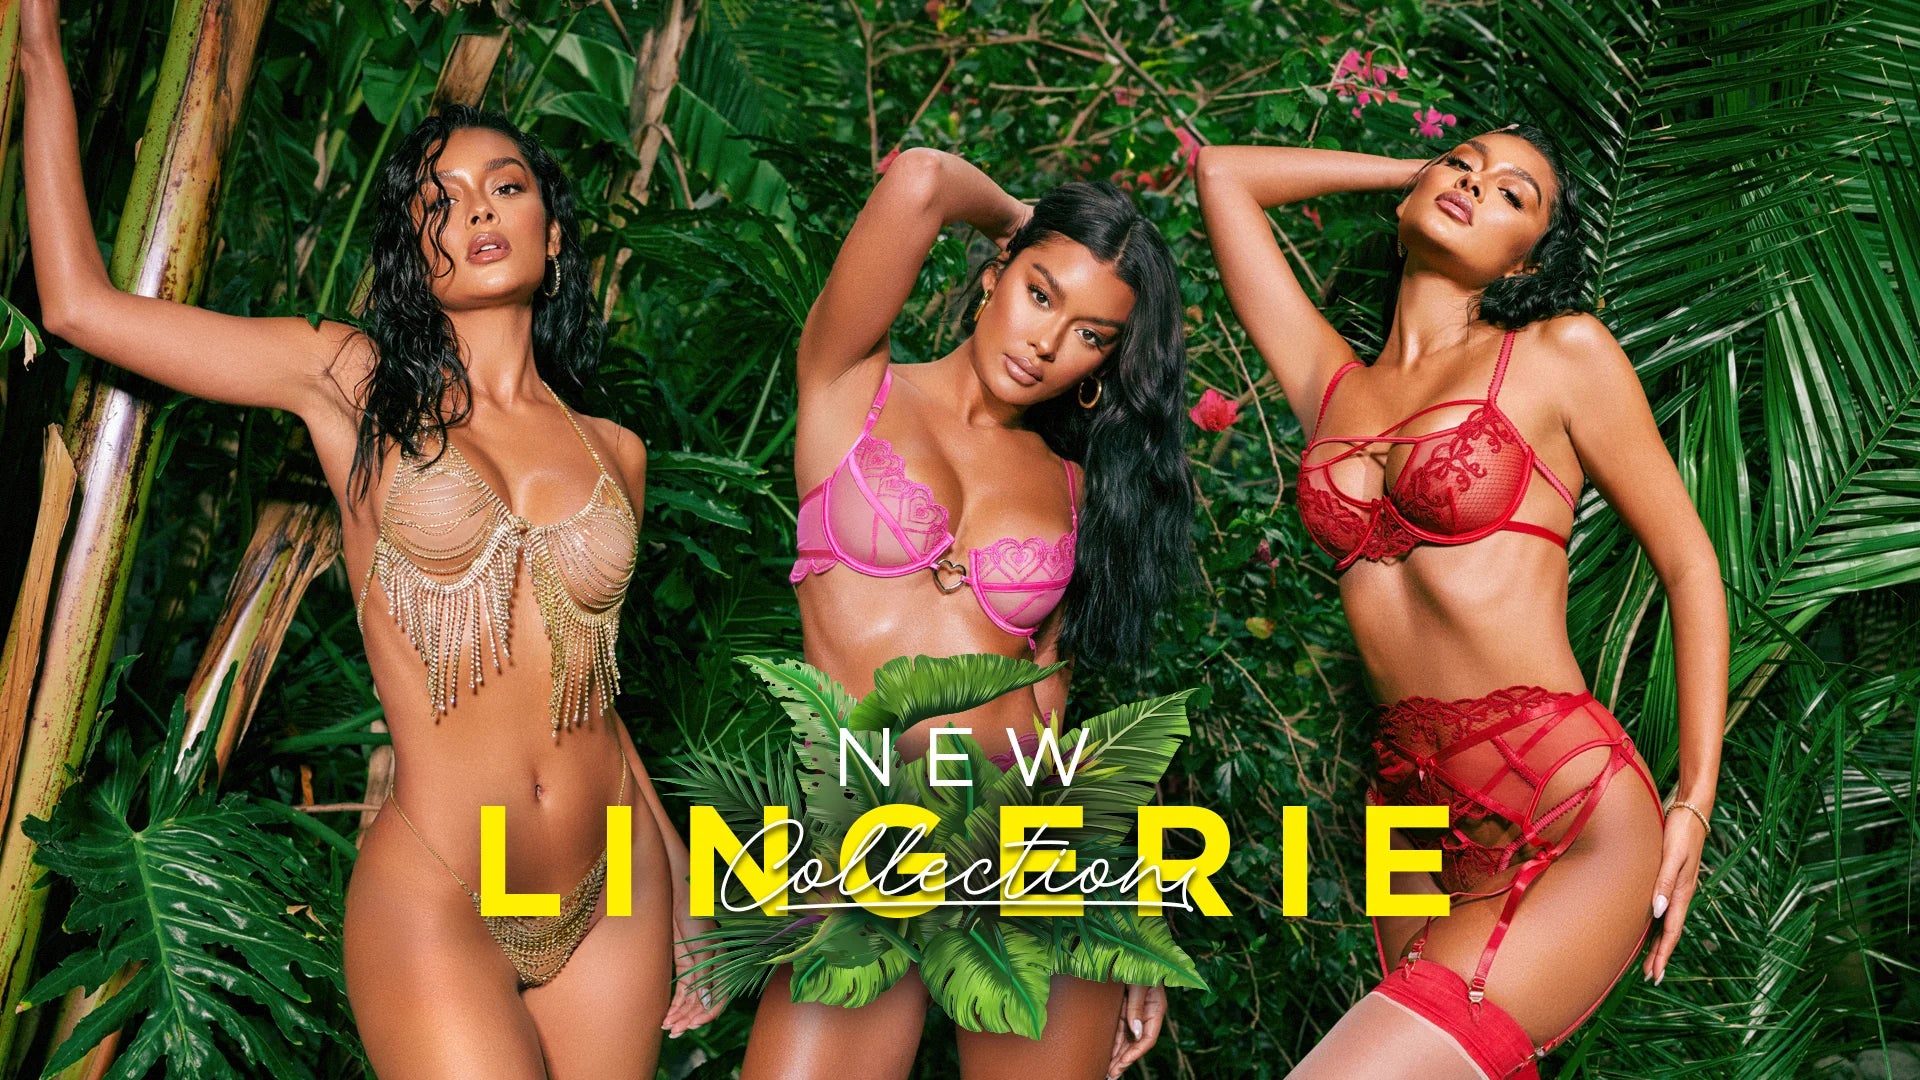 Most Flattering Lingerie Styles for Every Body Type